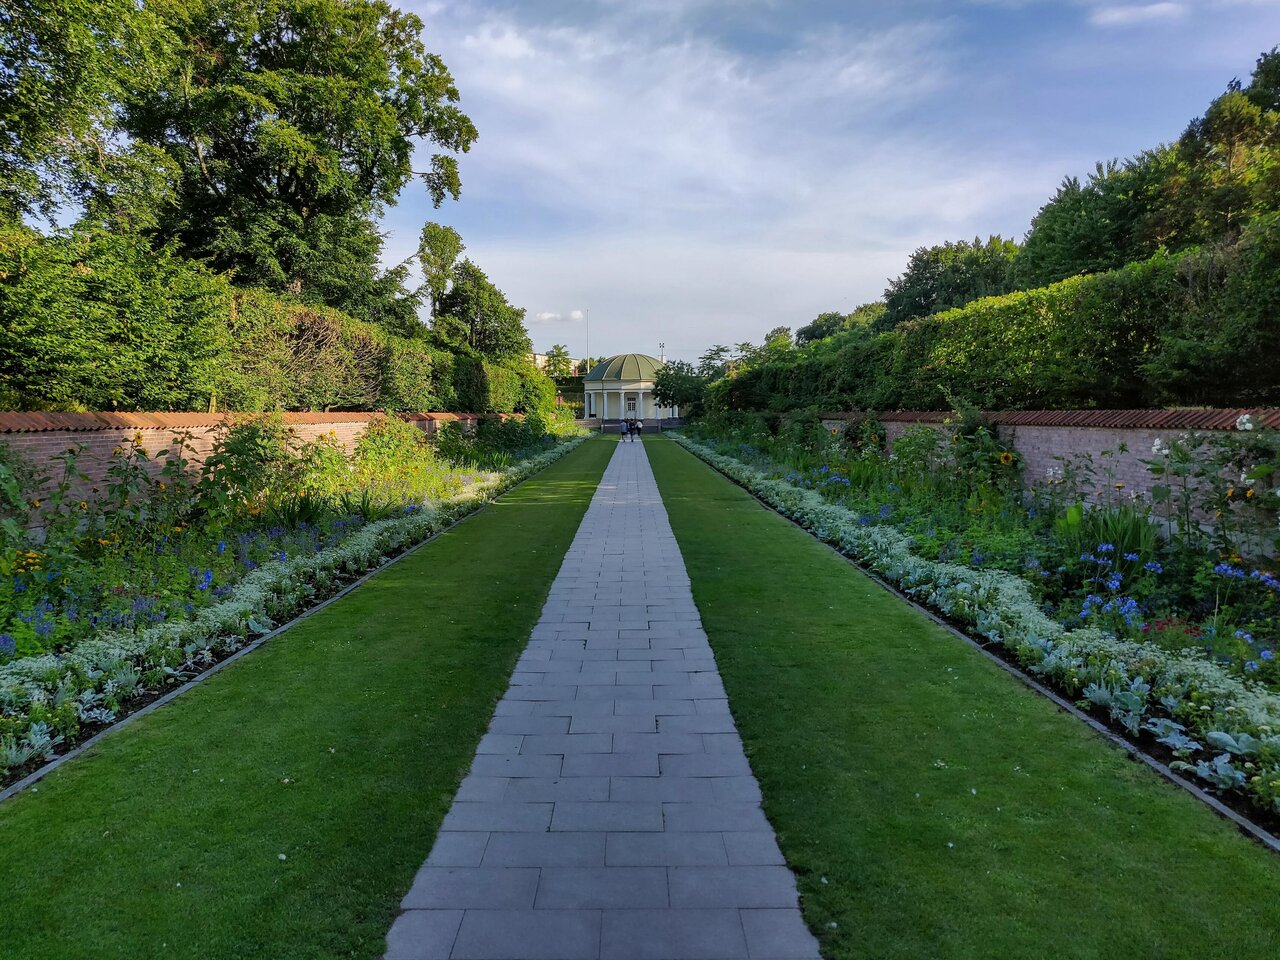 Path between grass and plants in a garden